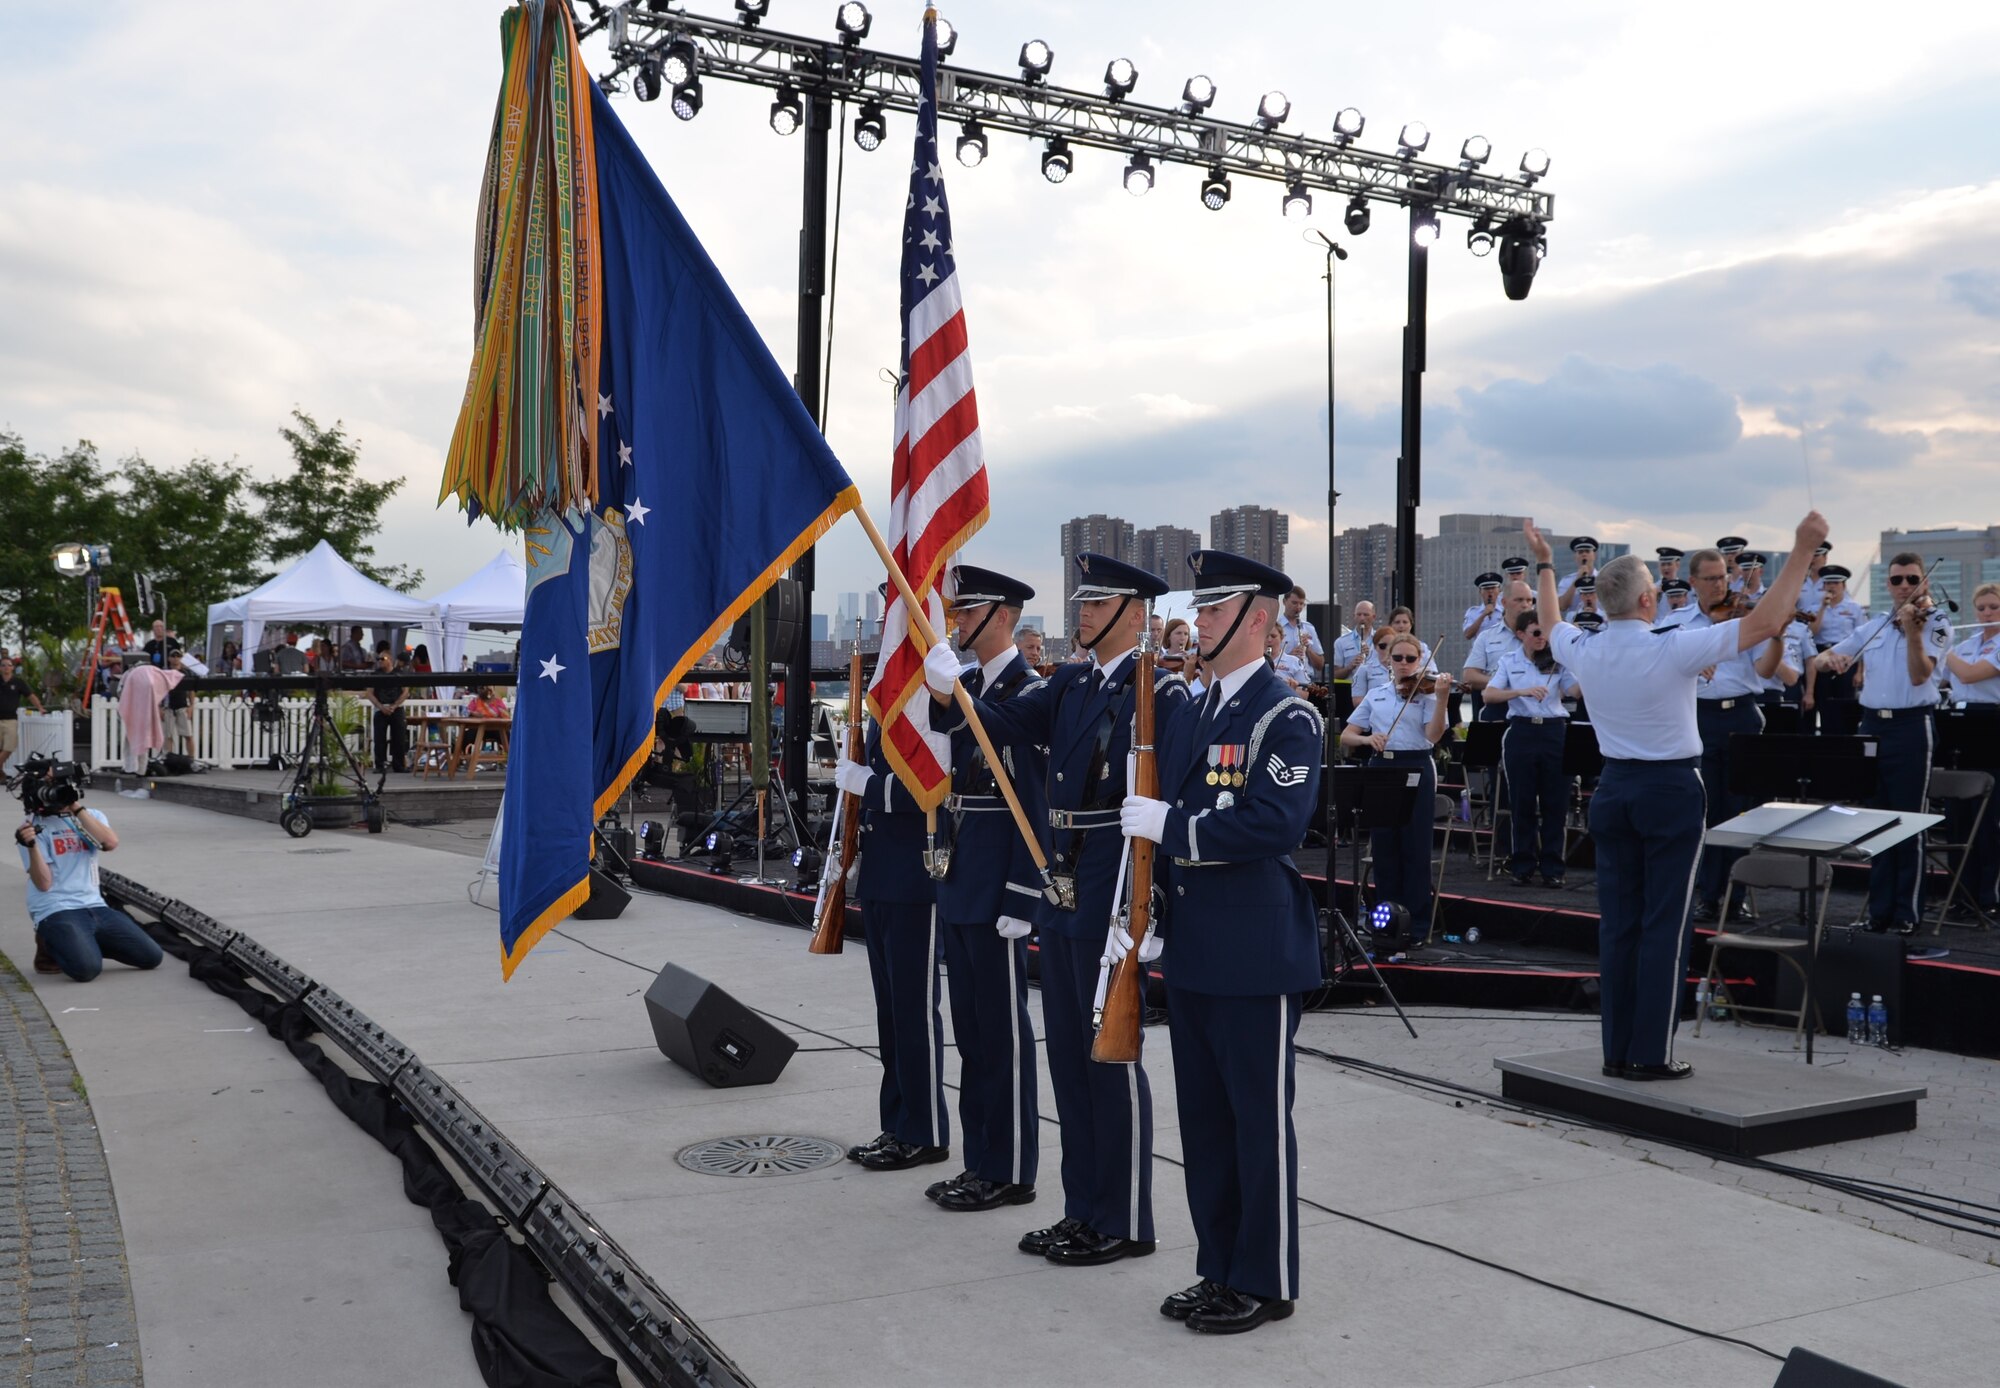 Members of the United States Air Force Honor Guard post the nation’s Colors while the Air Force band performs behind them during a performance at the Macy’s Fireworks Show on July 4, 2015. This performance was part of a larger five-day tour in New York City to represent the Air Force on the nation's birthday (U.S. Air Force photo/1Lt. Esther Willett).